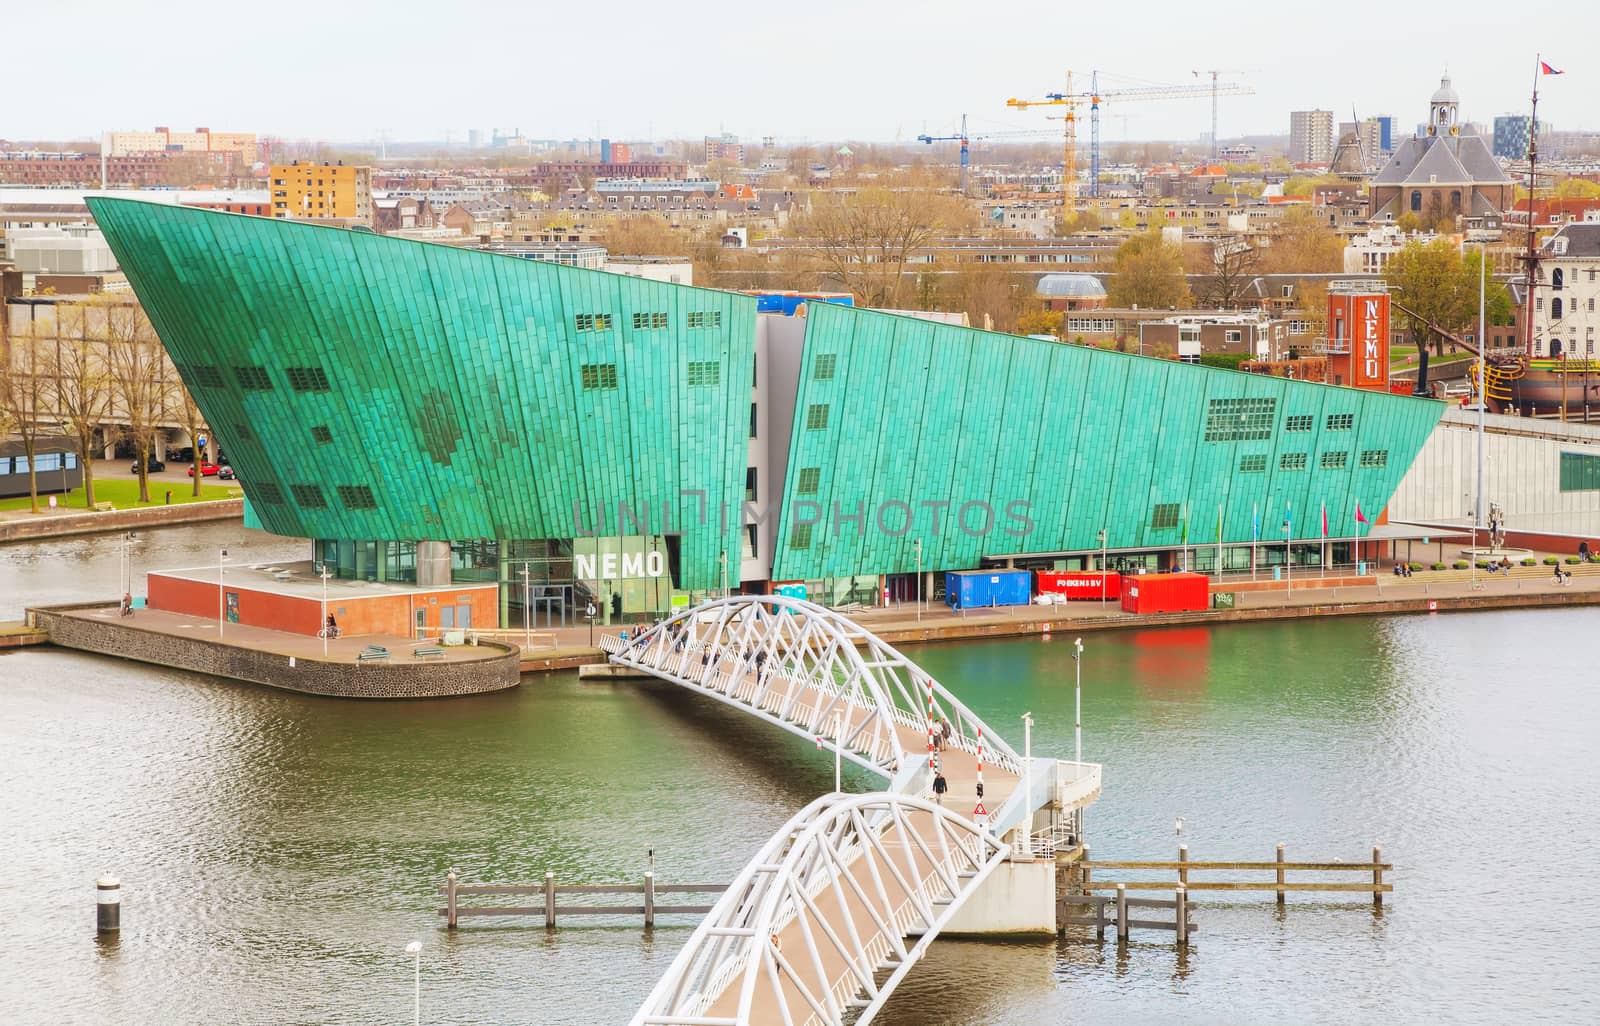 AMSTERDAM - APRIL 16: Science Center Nemo building on April 16, 2015 in Amsterdam, Netherlands. It contains five floors of hands-on science exhibitions and is the largest science center in the Netherlands.